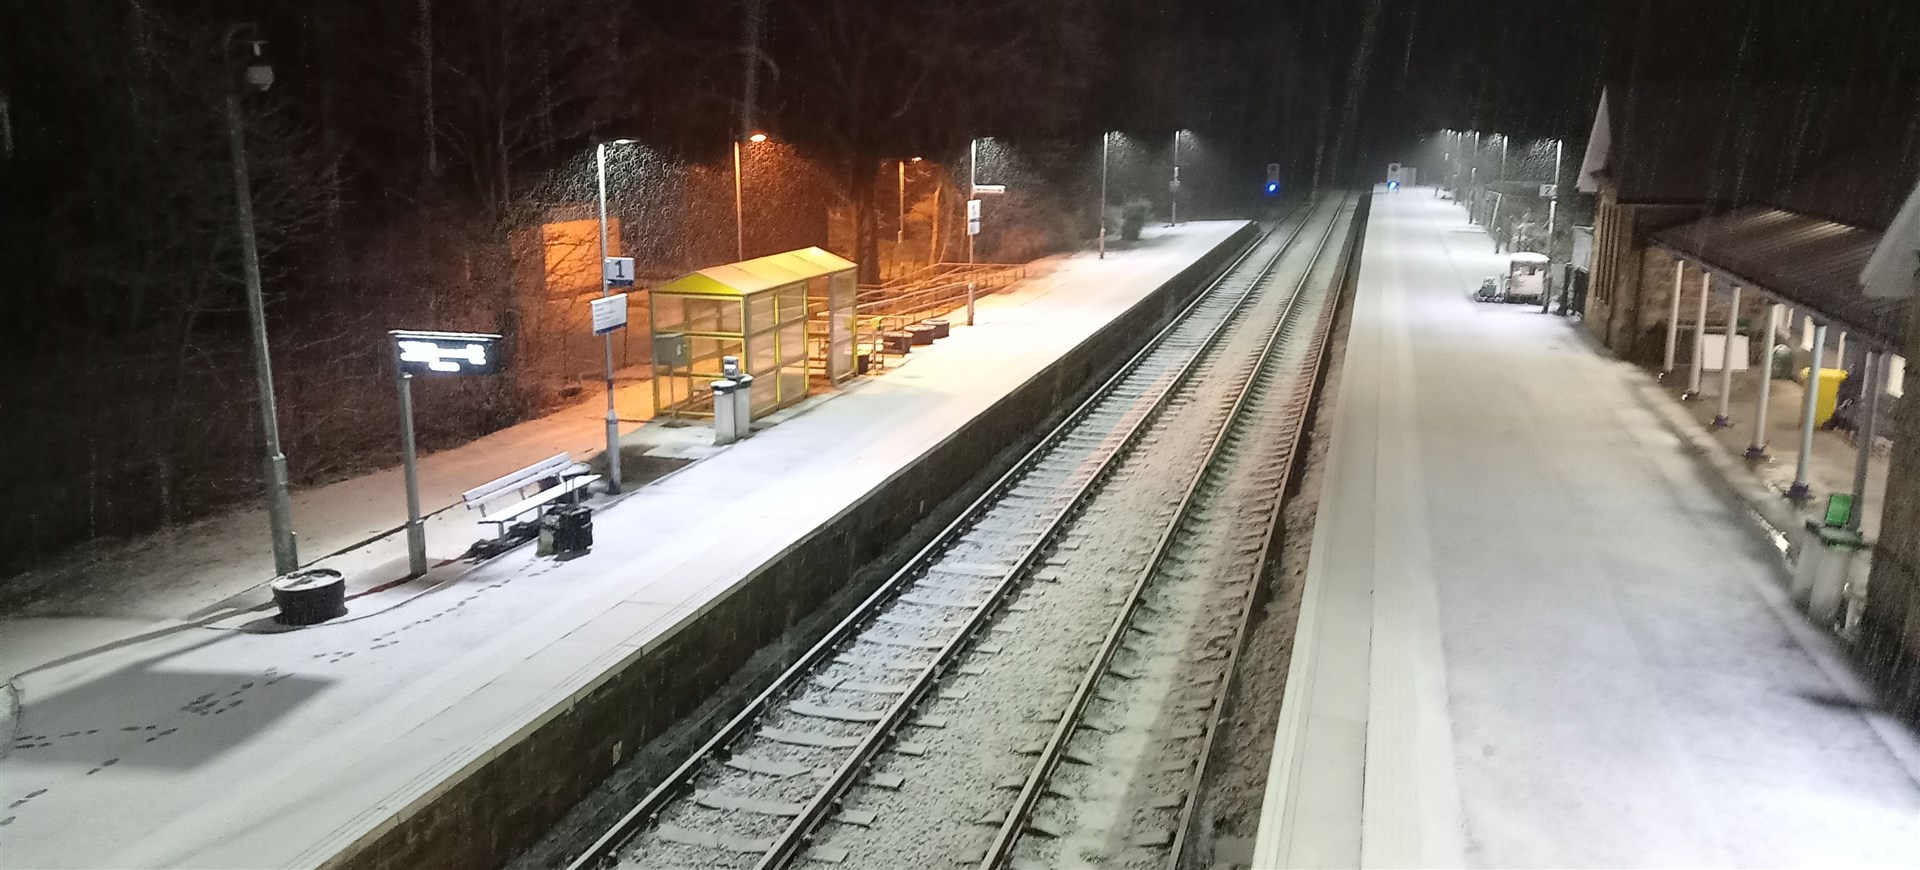 Snow was falling at Tain Railway Station first thing on Saturday morning.